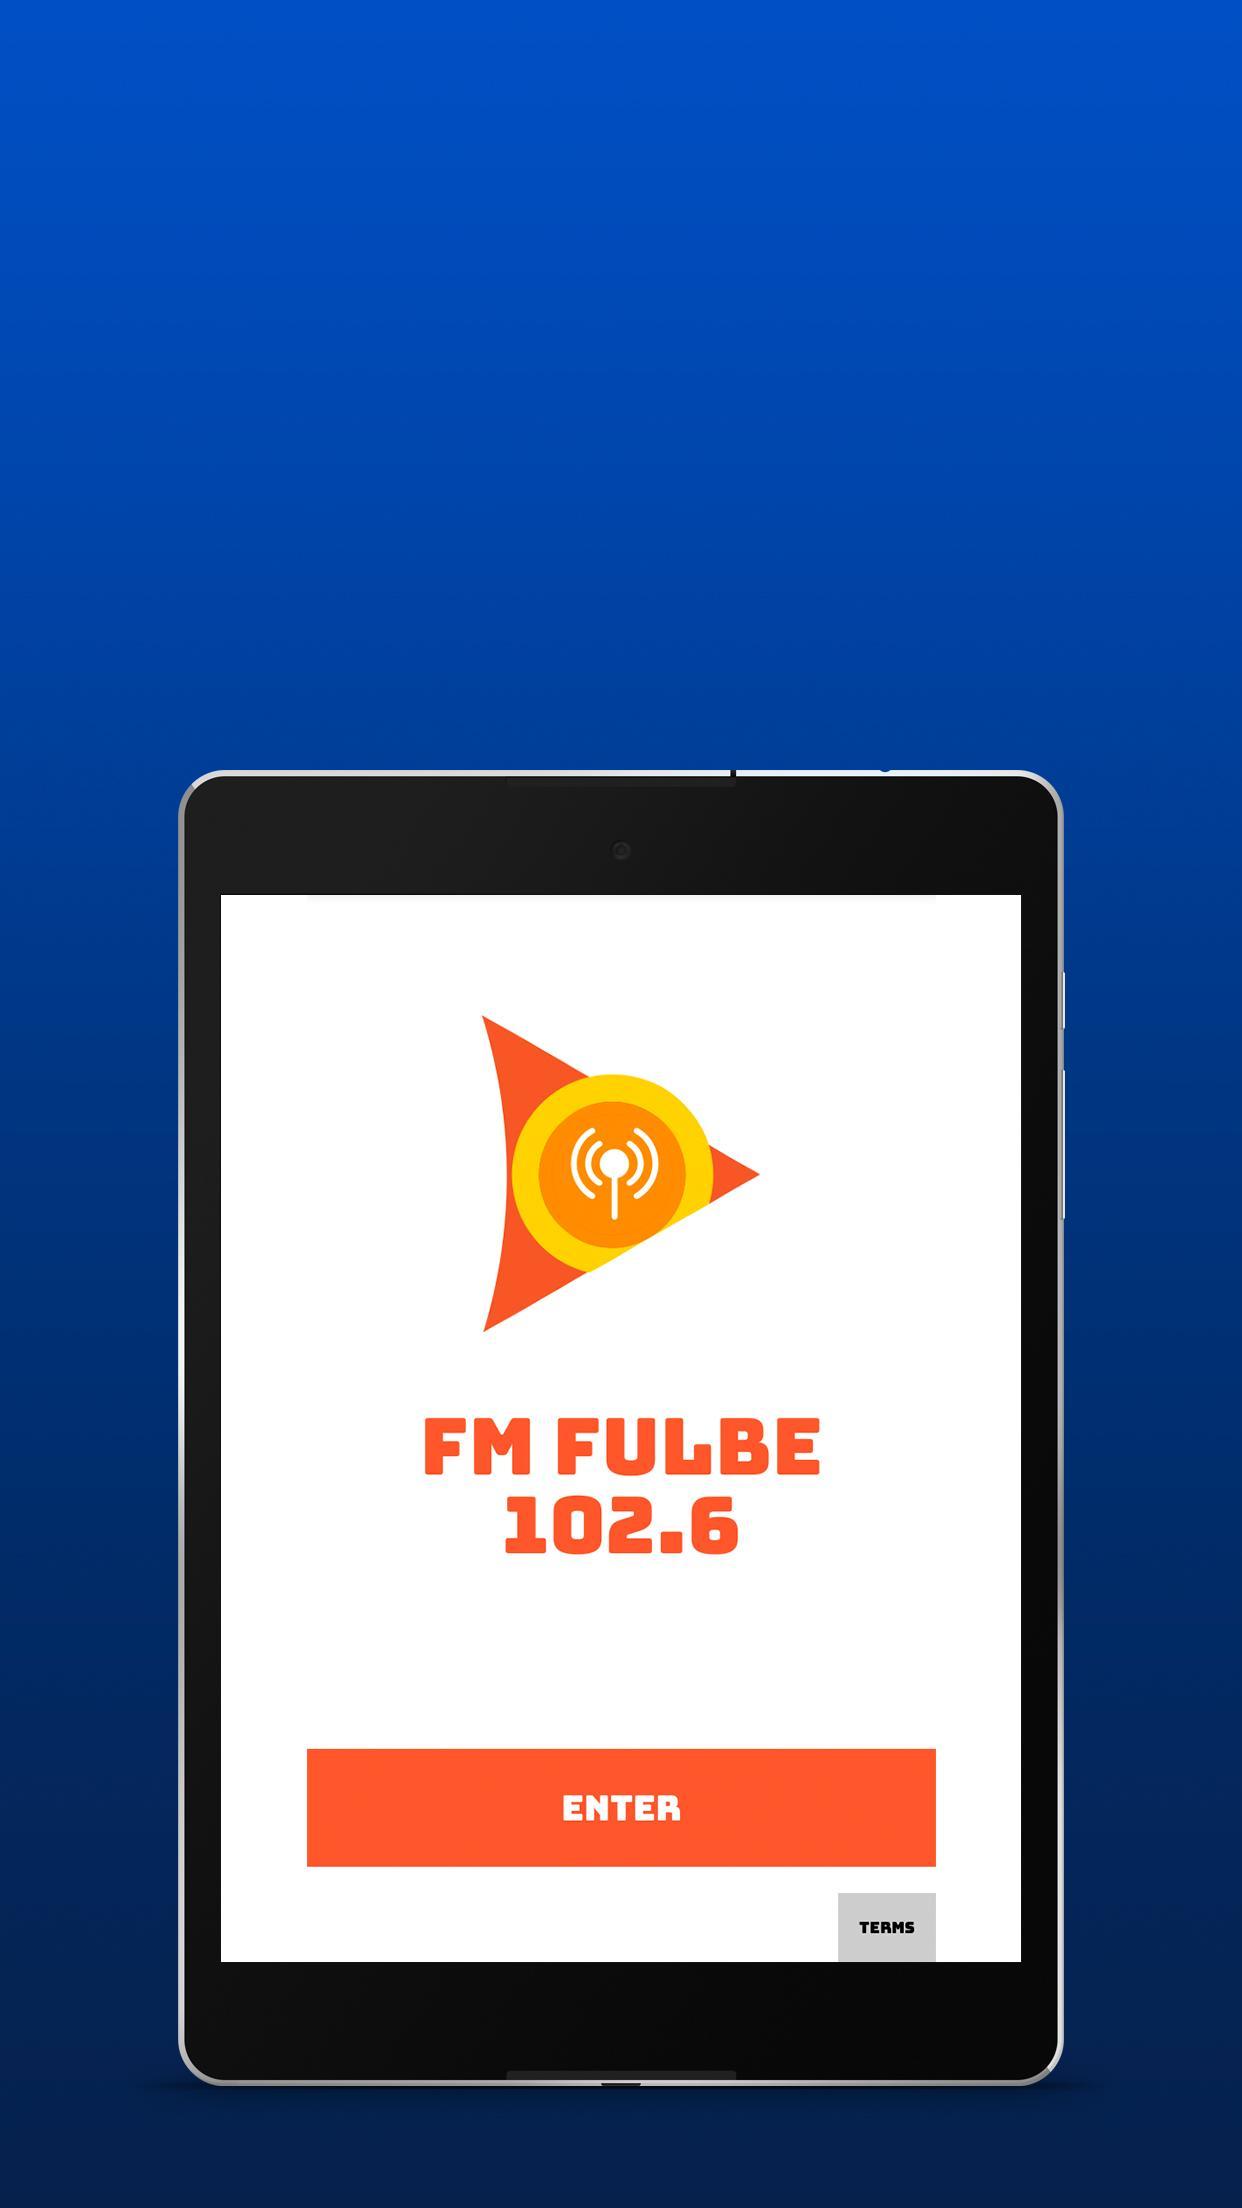 Fm Fulbe 102.6 for Android - APK Download